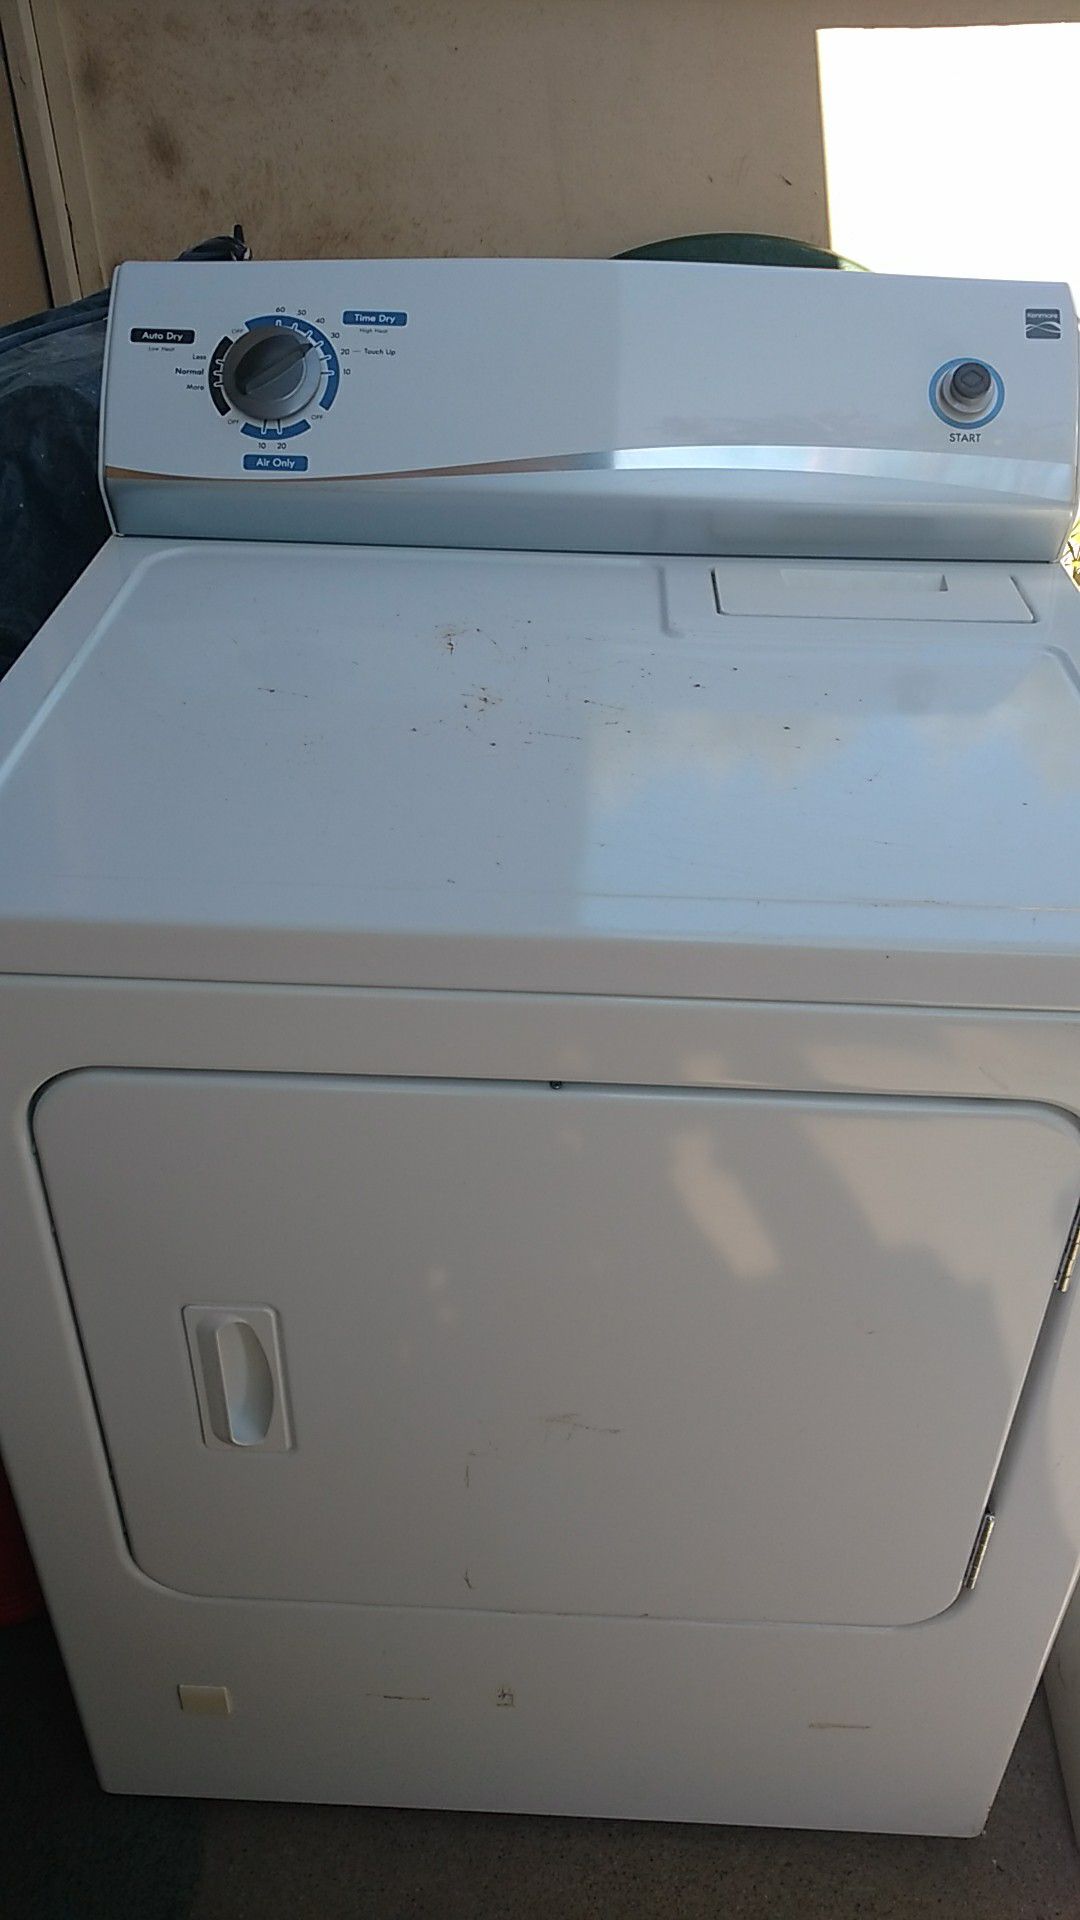 Kenmore gas dryer,Maytag heavy duty washer excellent working condition,both $400